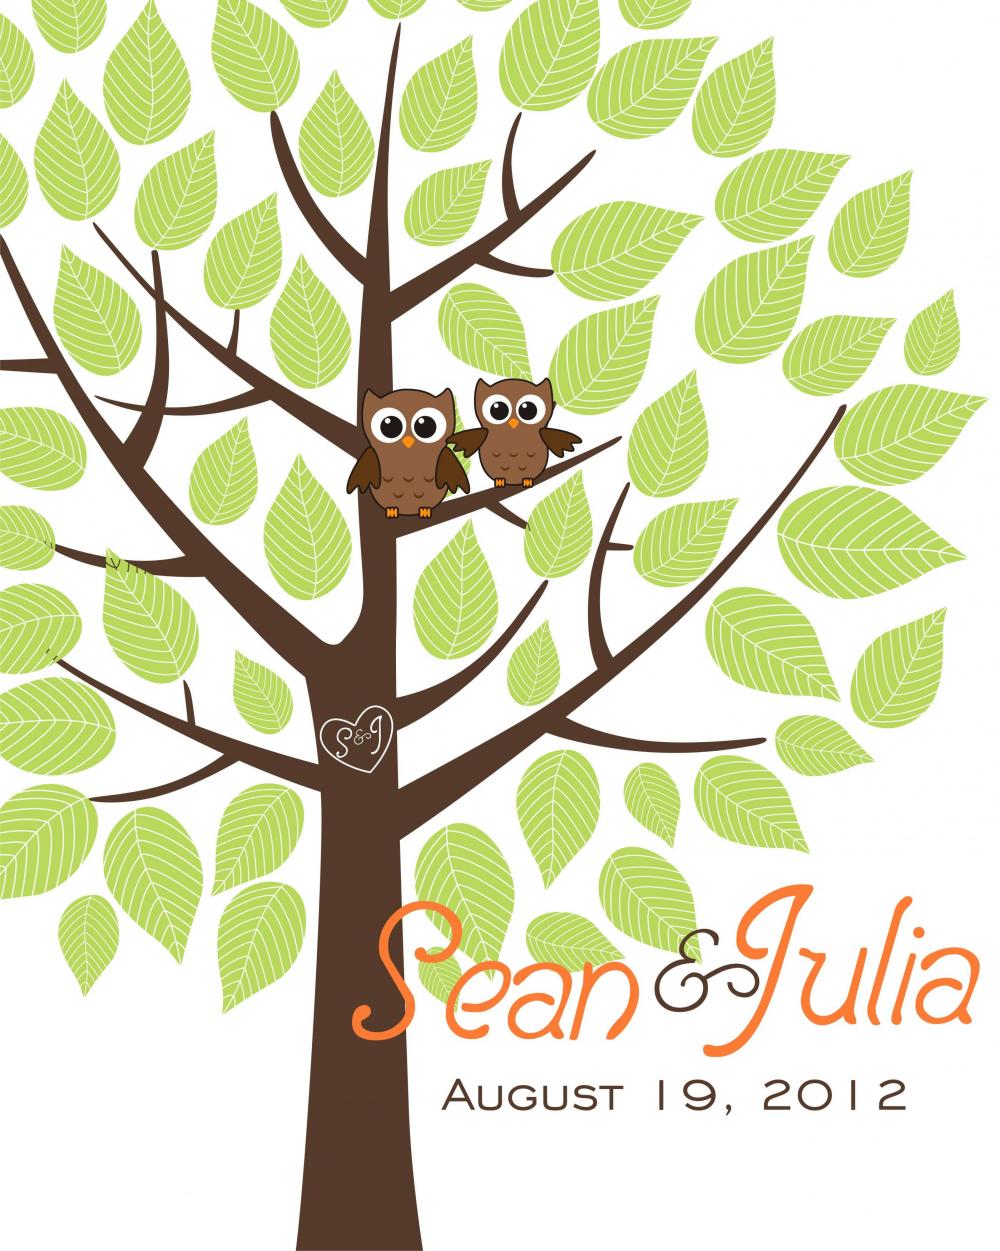 Personalized Wedding Signature Tree 16x20 75 Signatures, Guestbook Alternative Tree With Owls Green